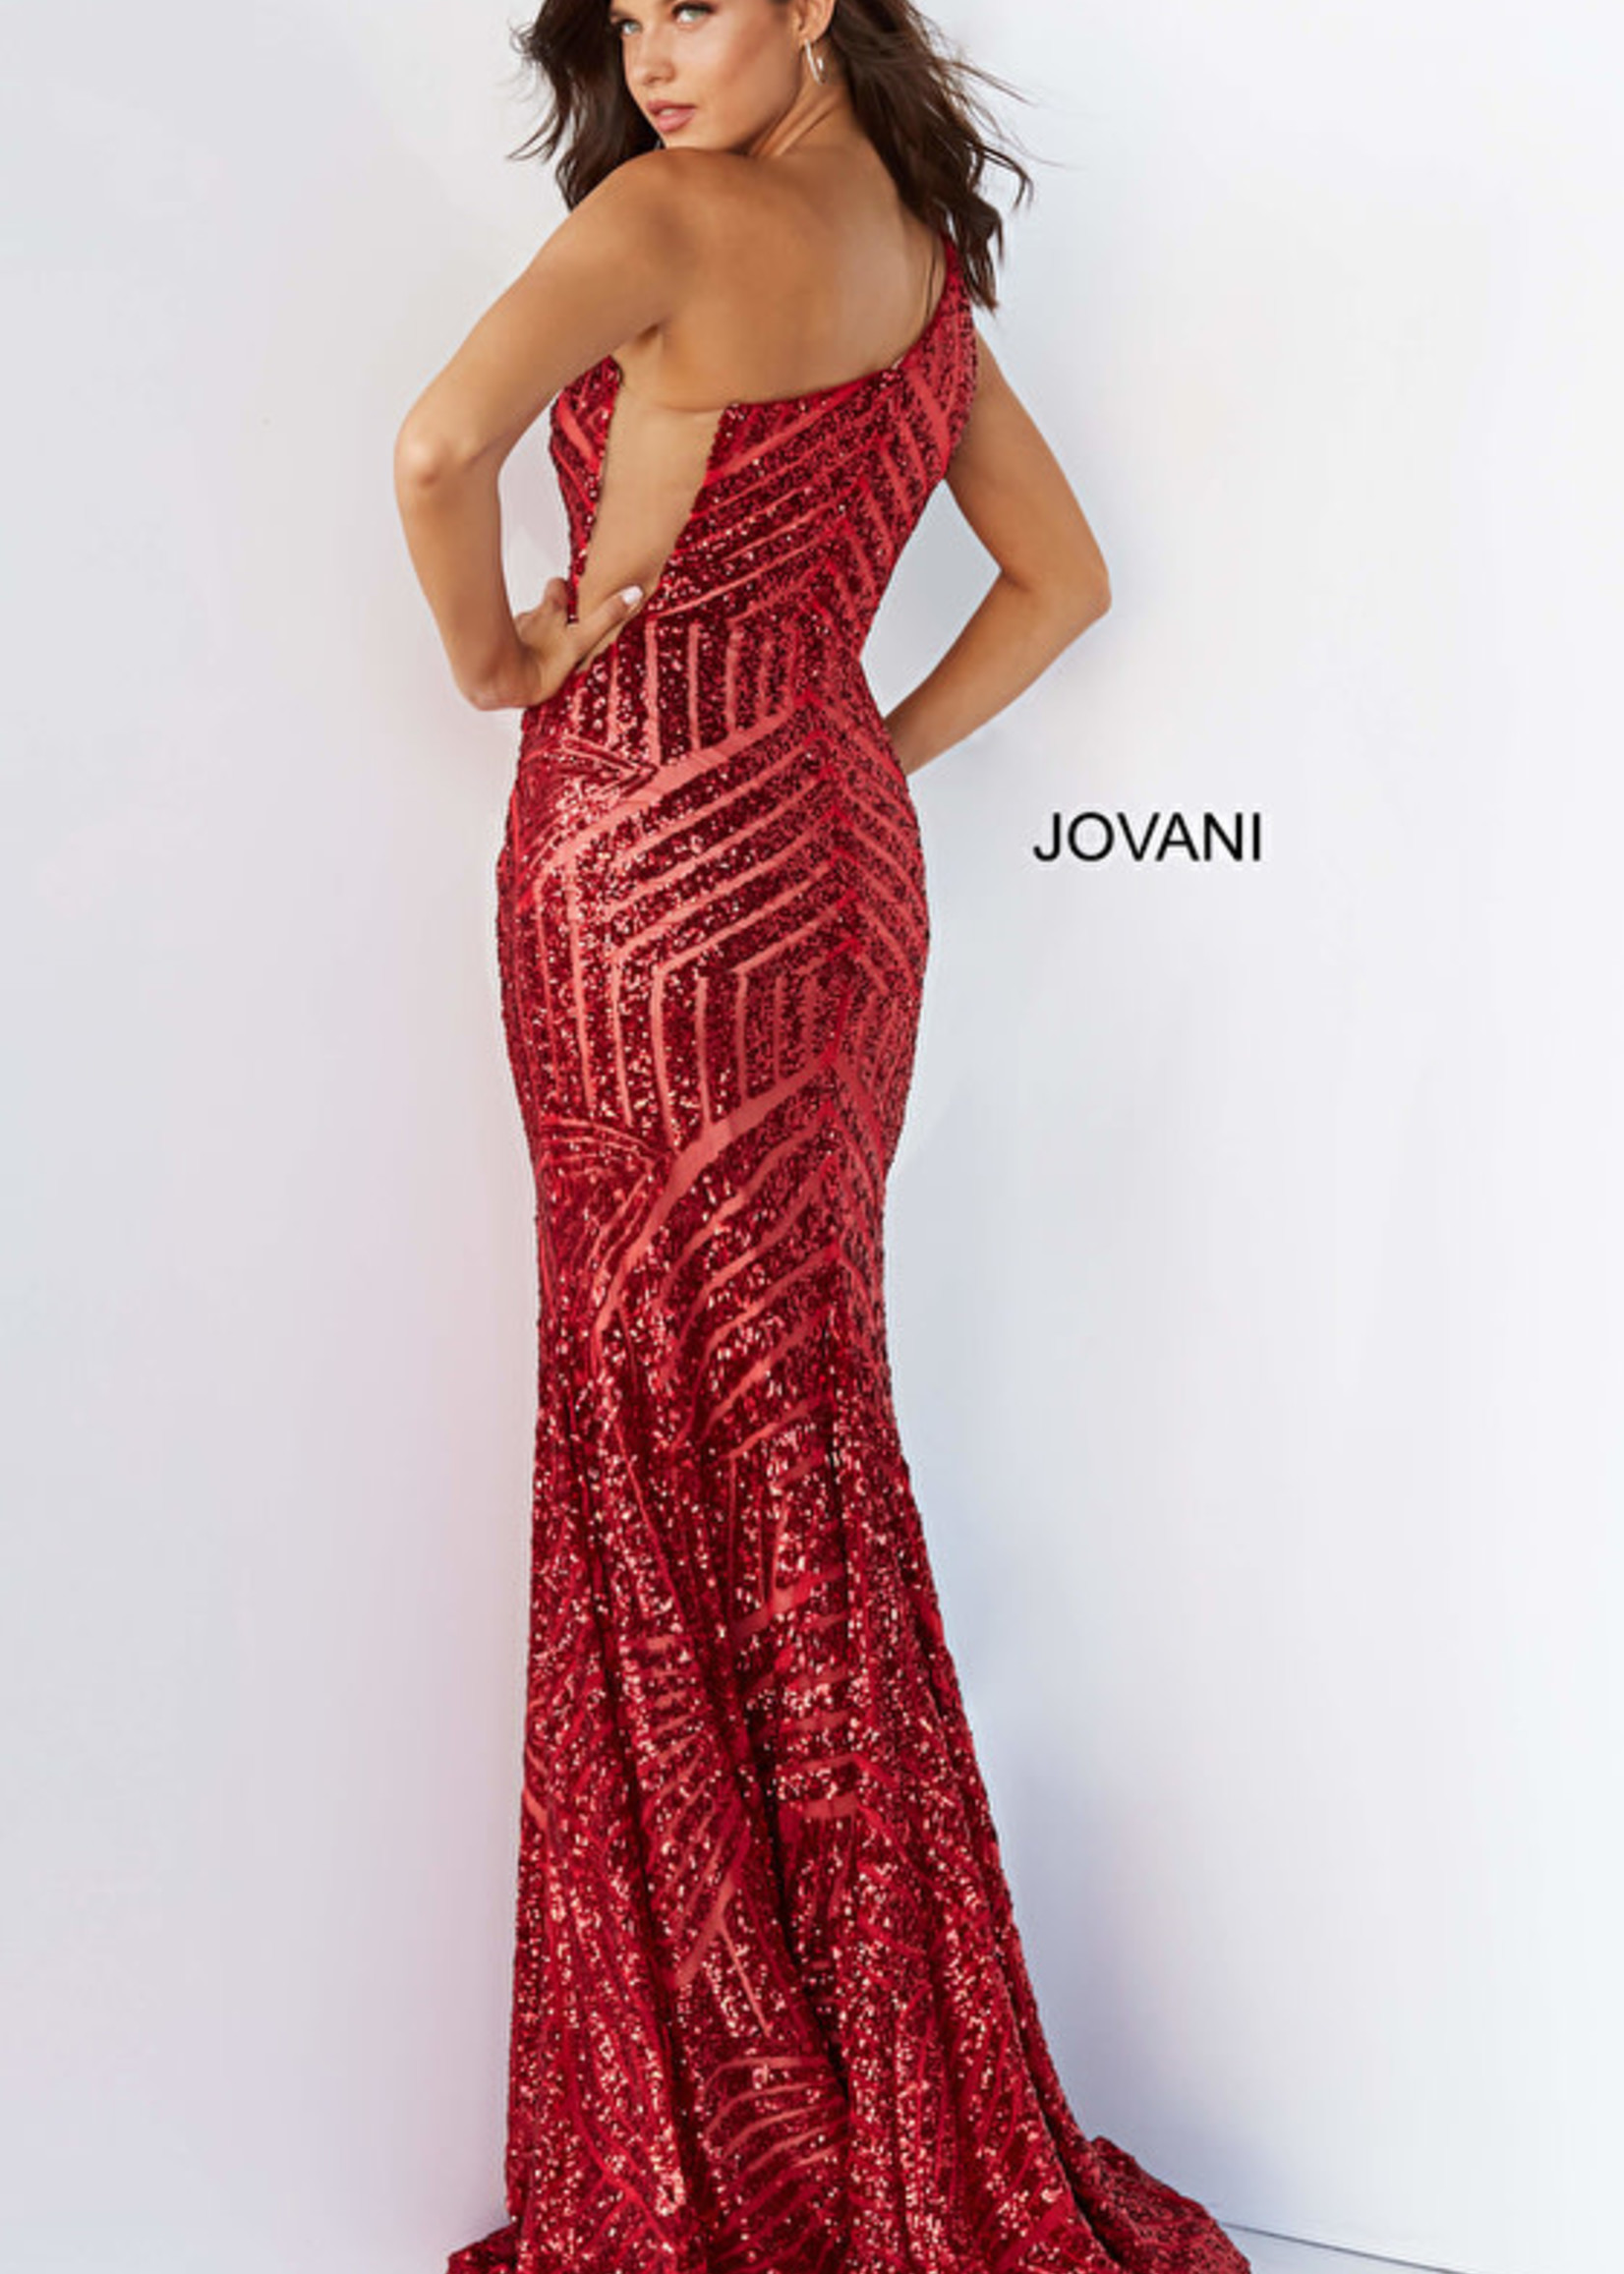 Jovani Night to Remember Formal Dress (3 Colors)